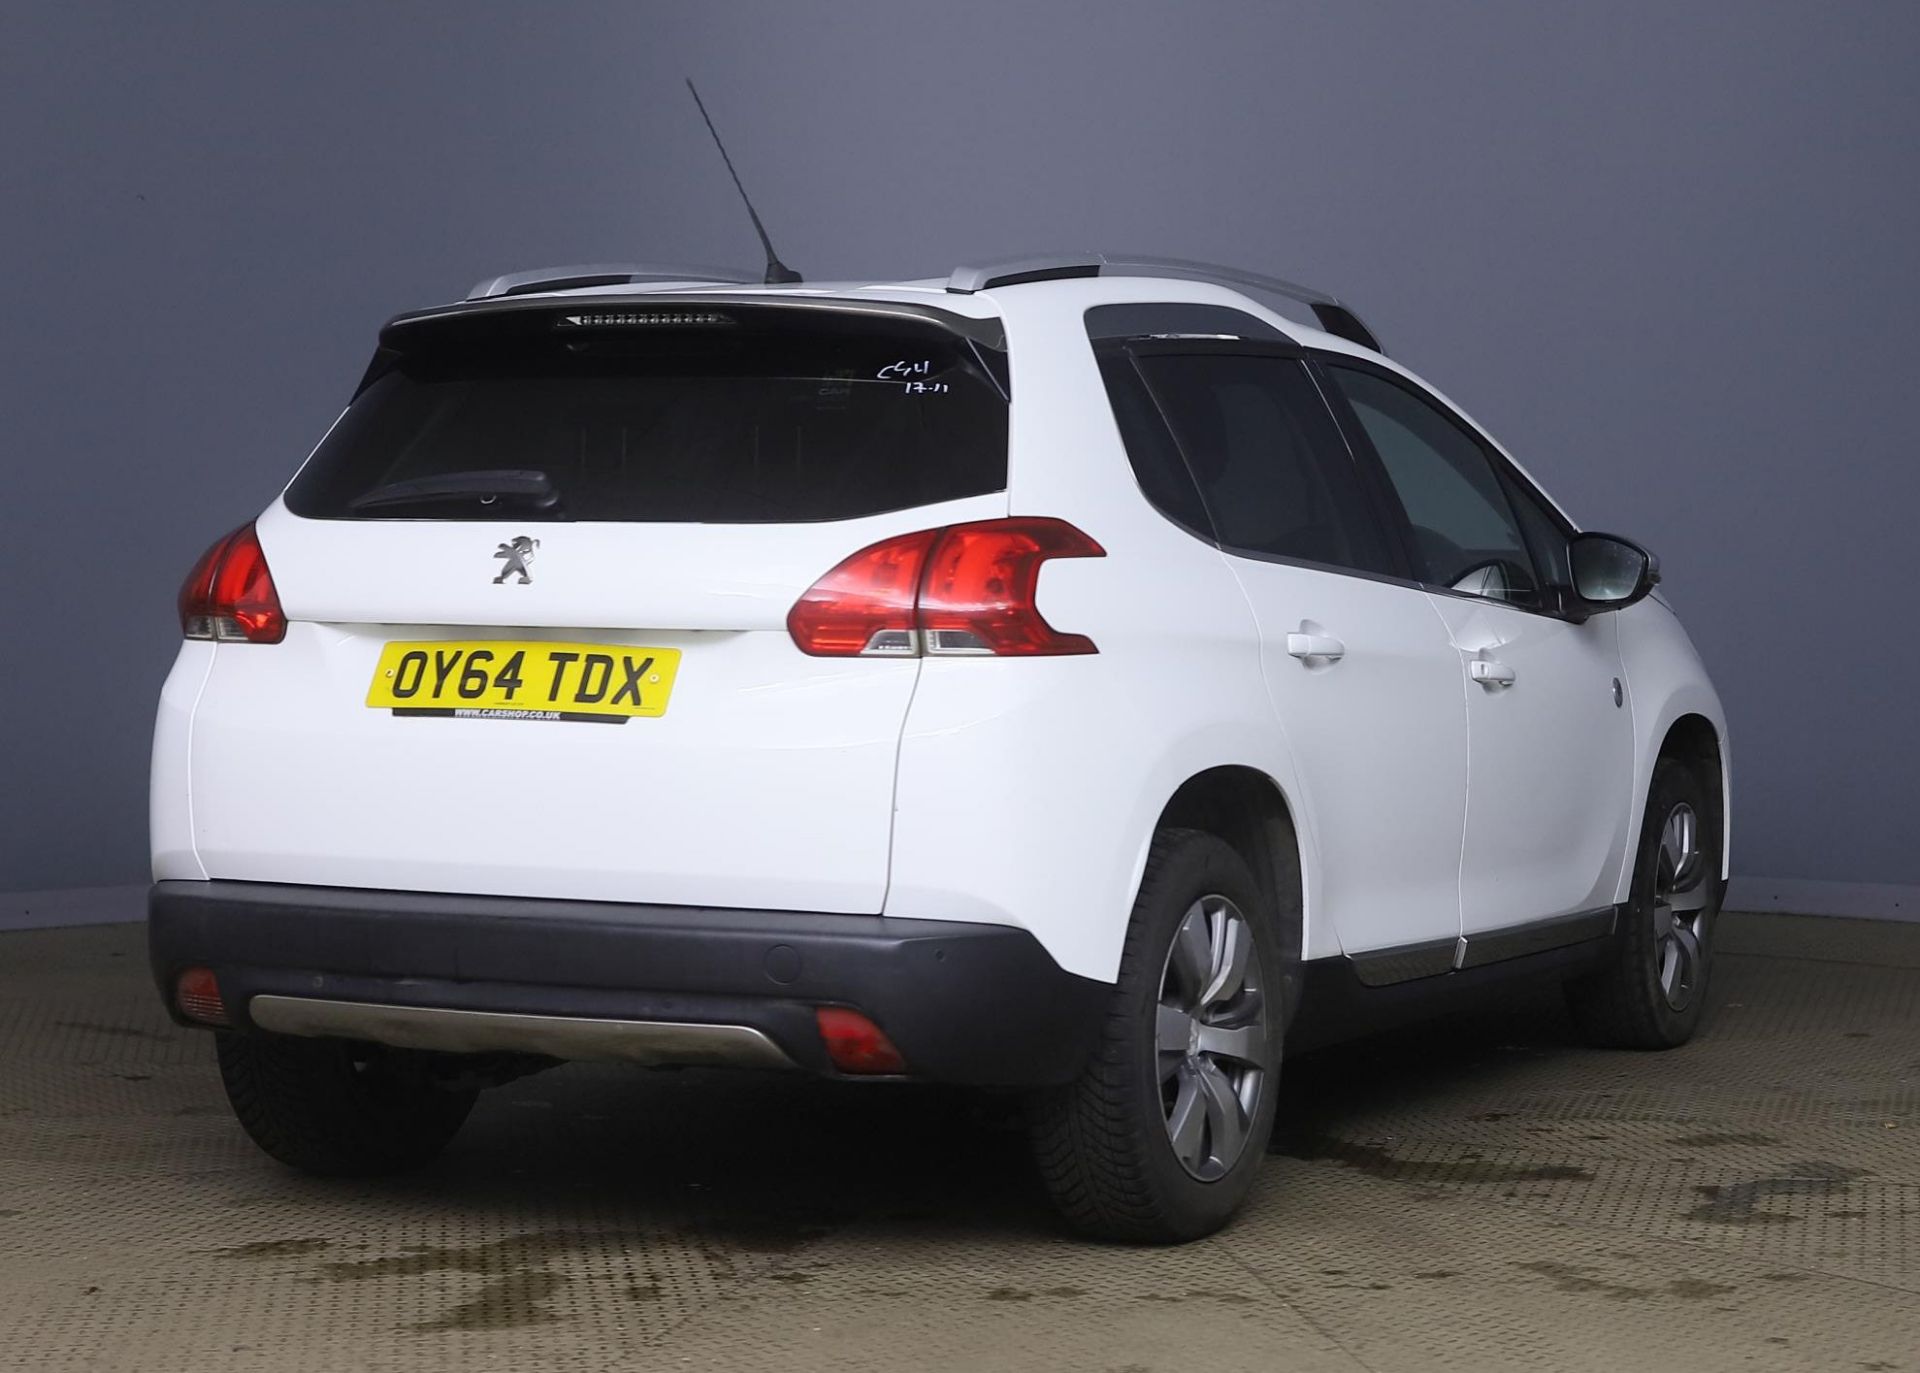 2014 Peugeot 2008 1.2 Crossway 5 Door MPV - FSH - CL505 - NO VAT ON THE HAMMER - Location: Corby, No - Image 5 of 12